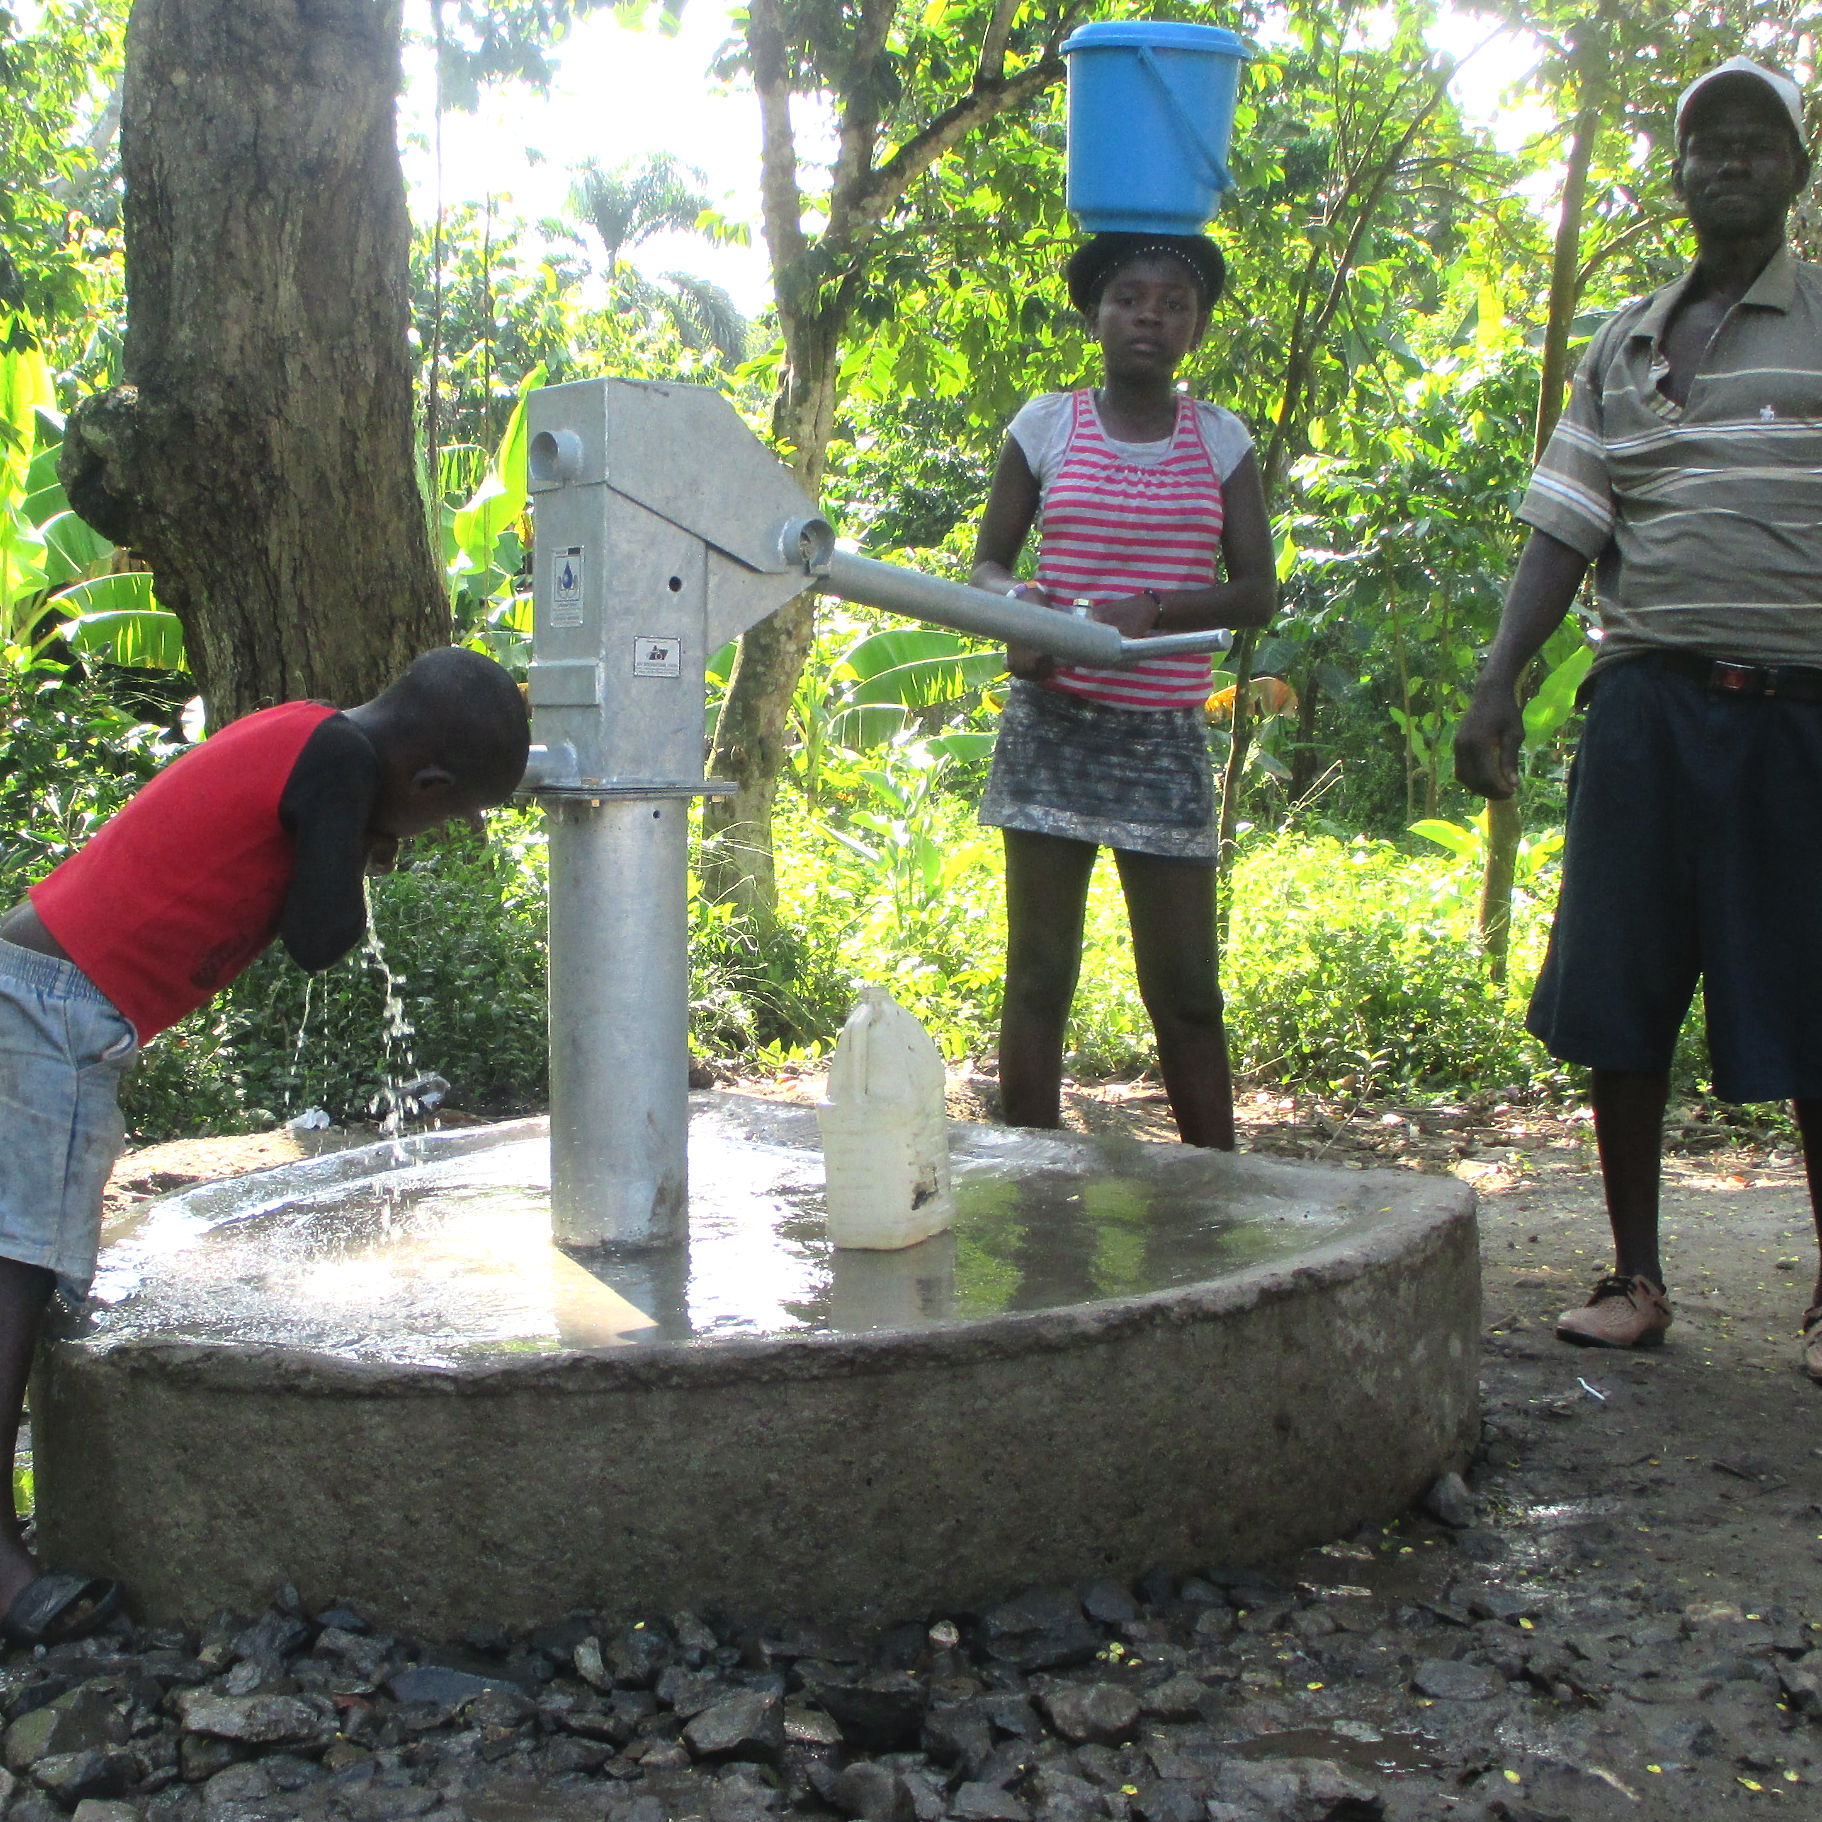 New Well for this community of 2000 people